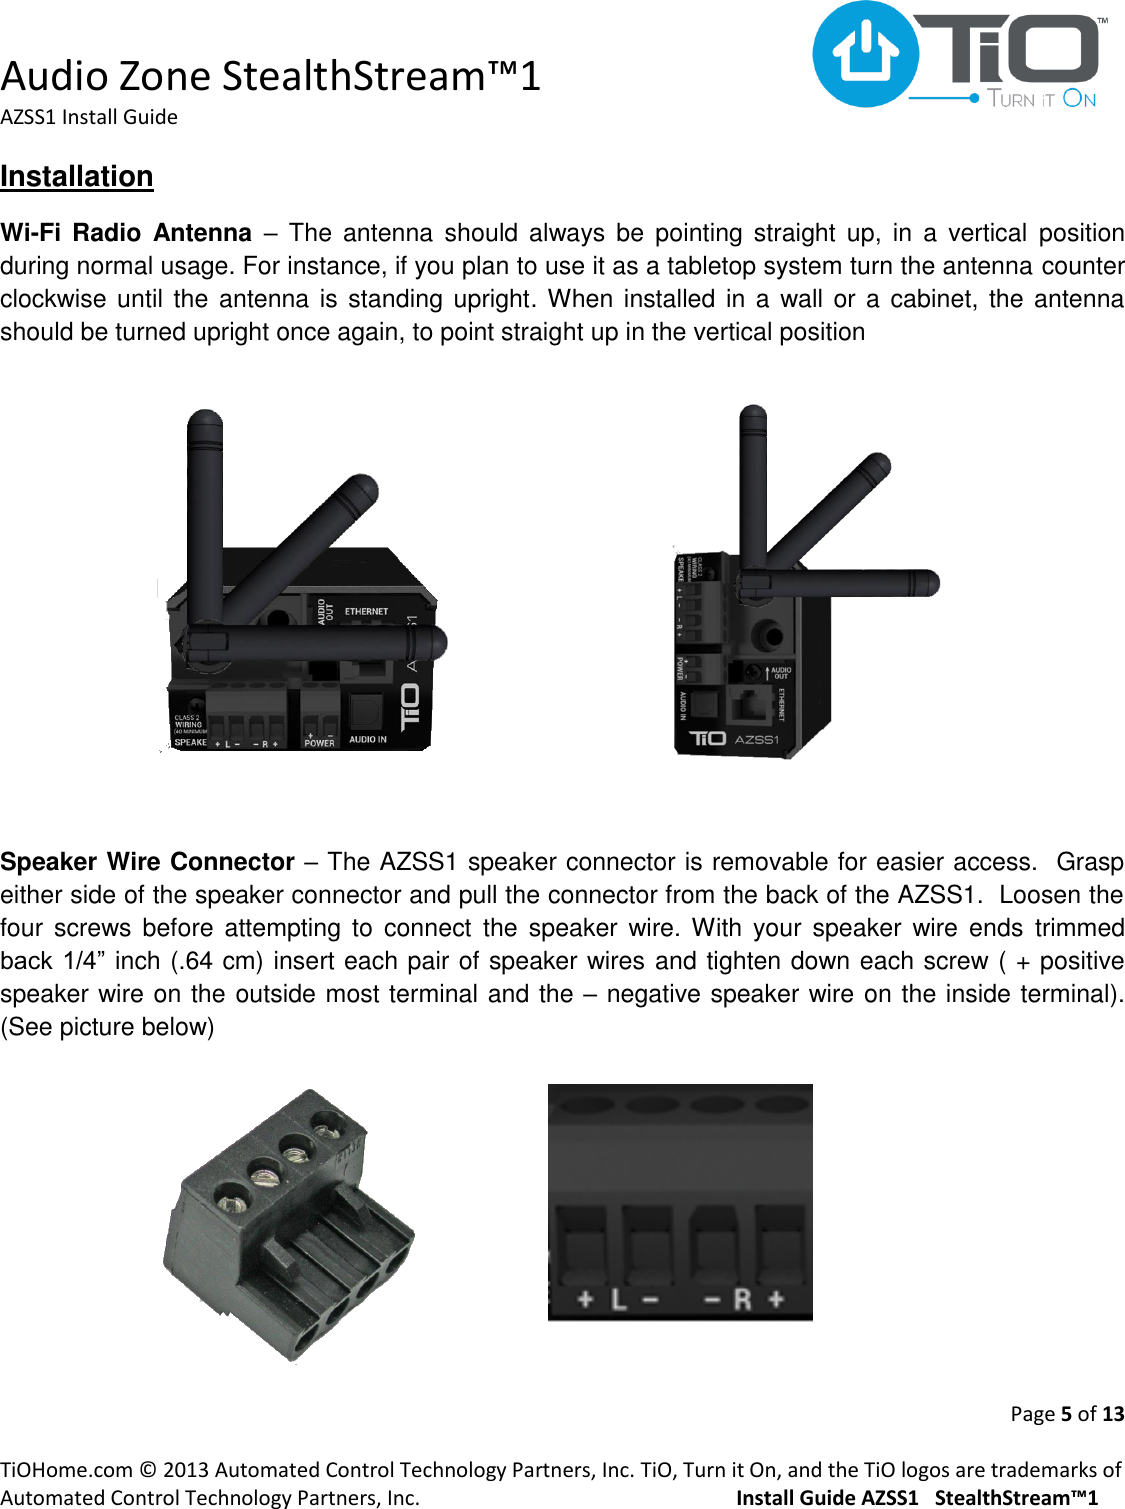  Audio Zone StealthStream™1 AZSS1 Install Guide  Page 5 of 13  TiOHome.com © 2013 Automated Control Technology Partners, Inc. TiO, Turn it On, and the TiO logos are trademarks of Automated Control Technology Partners, Inc.                                                  Install Guide AZSS1   StealthStream™1 Installation Wi-Fi Radio  Antenna –  The  antenna  should always  be  pointing  straight  up,  in  a  vertical  position during normal usage. For instance, if you plan to use it as a tabletop system turn the antenna counter clockwise until  the antenna is standing upright. When installed in a wall or a cabinet, the  antenna should be turned upright once again, to point straight up in the vertical position         Speaker Wire Connector – The AZSS1 speaker connector is removable for easier access.  Grasp either side of the speaker connector and pull the connector from the back of the AZSS1.  Loosen the four  screws before  attempting  to  connect  the  speaker  wire. With  your  speaker  wire ends  trimmed back 1/4” inch (.64 cm) insert each pair of speaker wires and tighten down each screw ( + positive speaker wire on the outside most terminal and the – negative speaker wire on the inside terminal).  (See picture below)       